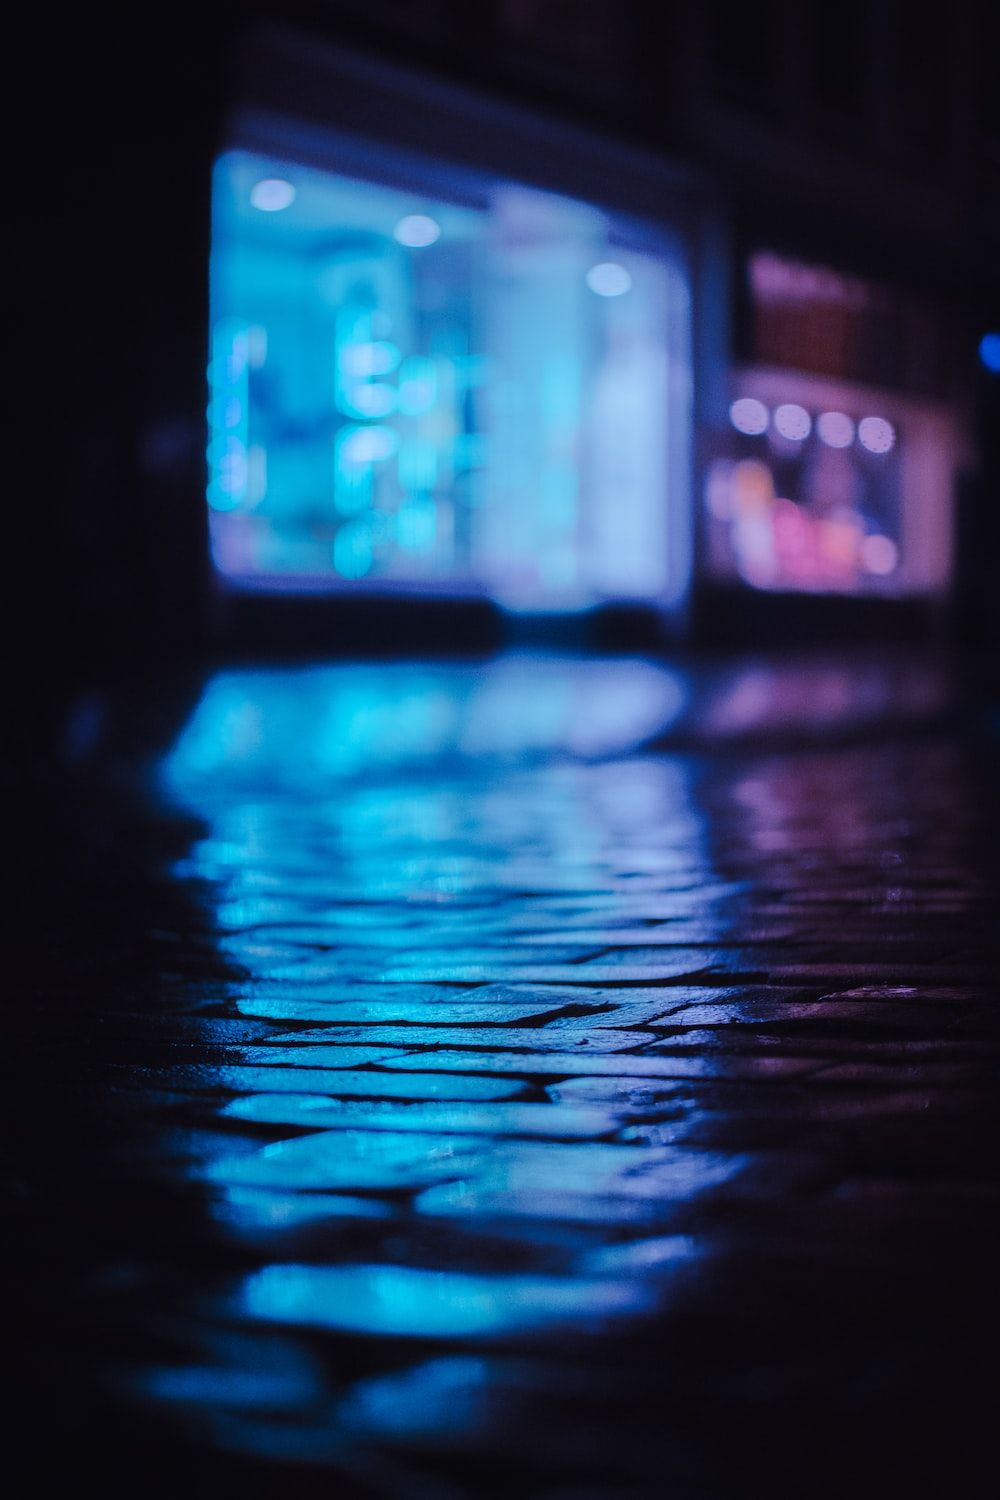 A wet street at night with blue lights reflecting on the pavement - Neon blue